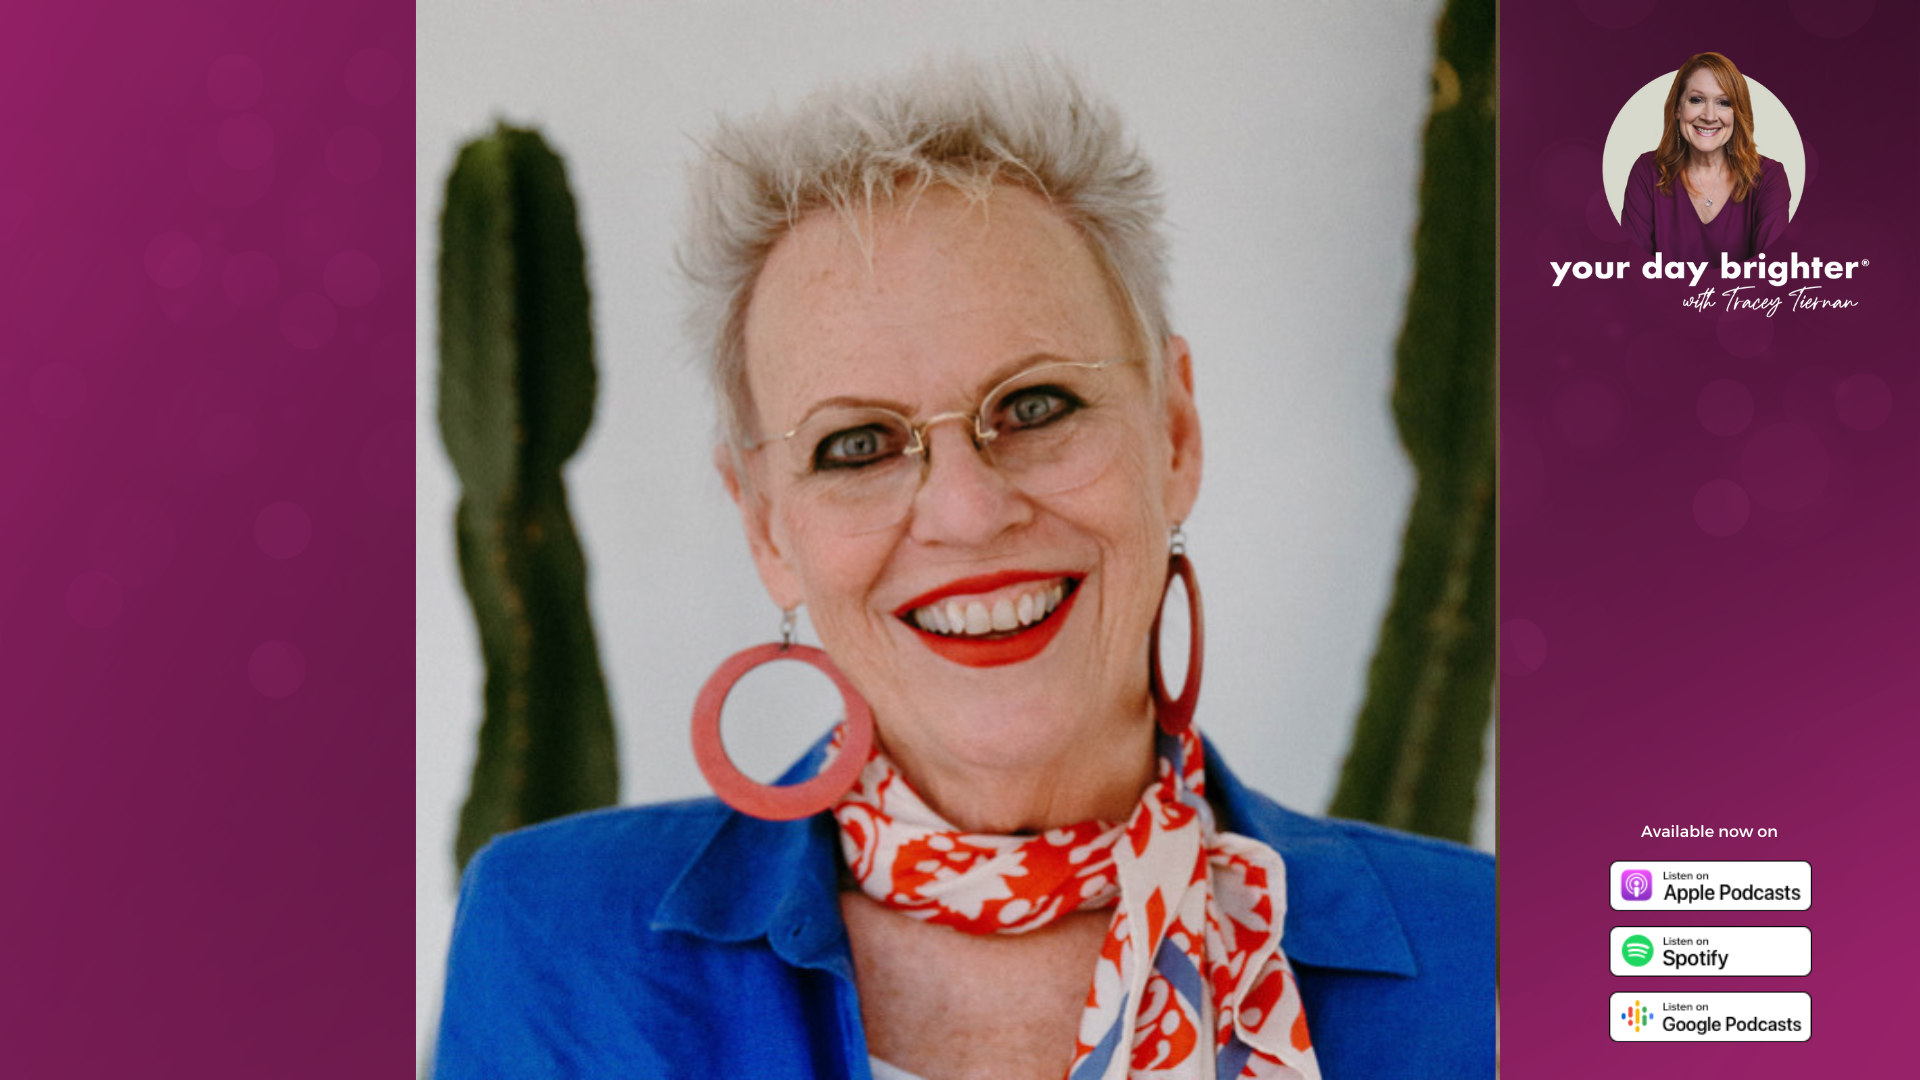 Kathy Gilbert smiling and wearing a royal blue shirt with a orange and white neck scarf and orange circle earrings